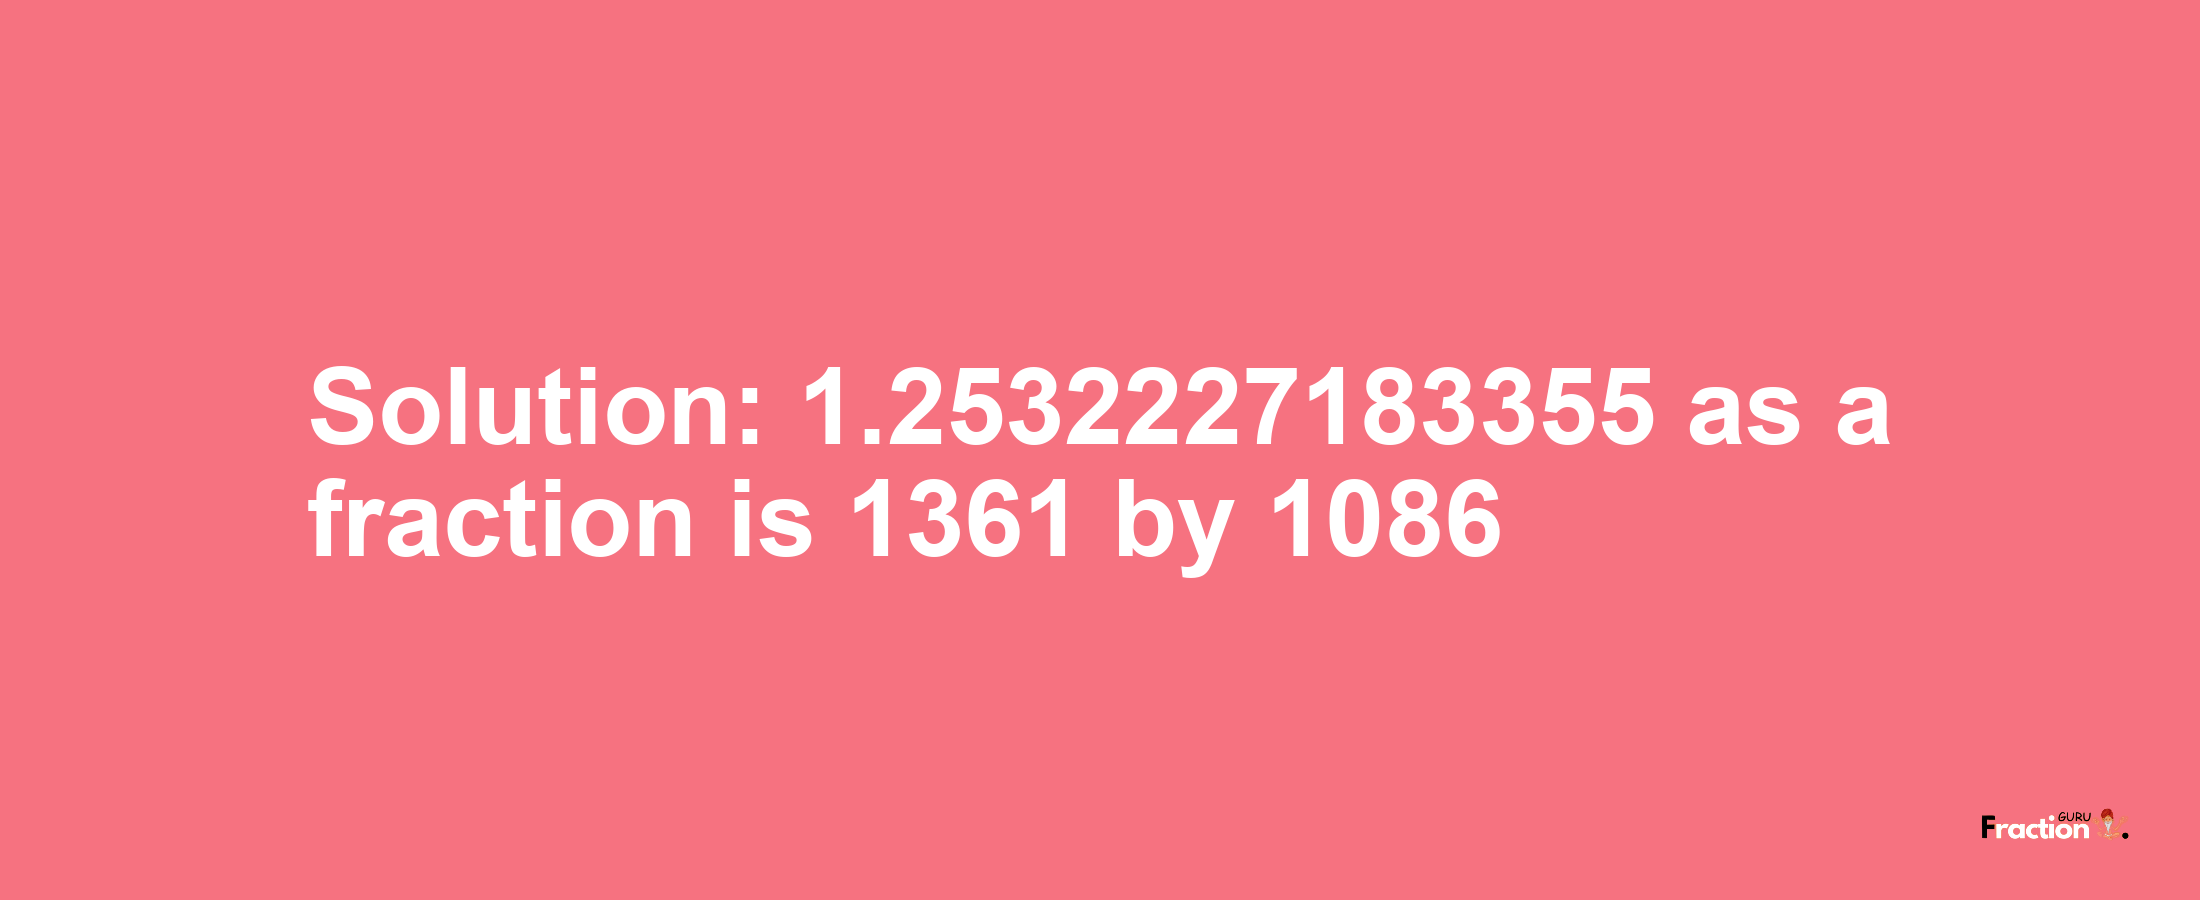 Solution:1.2532227183355 as a fraction is 1361/1086